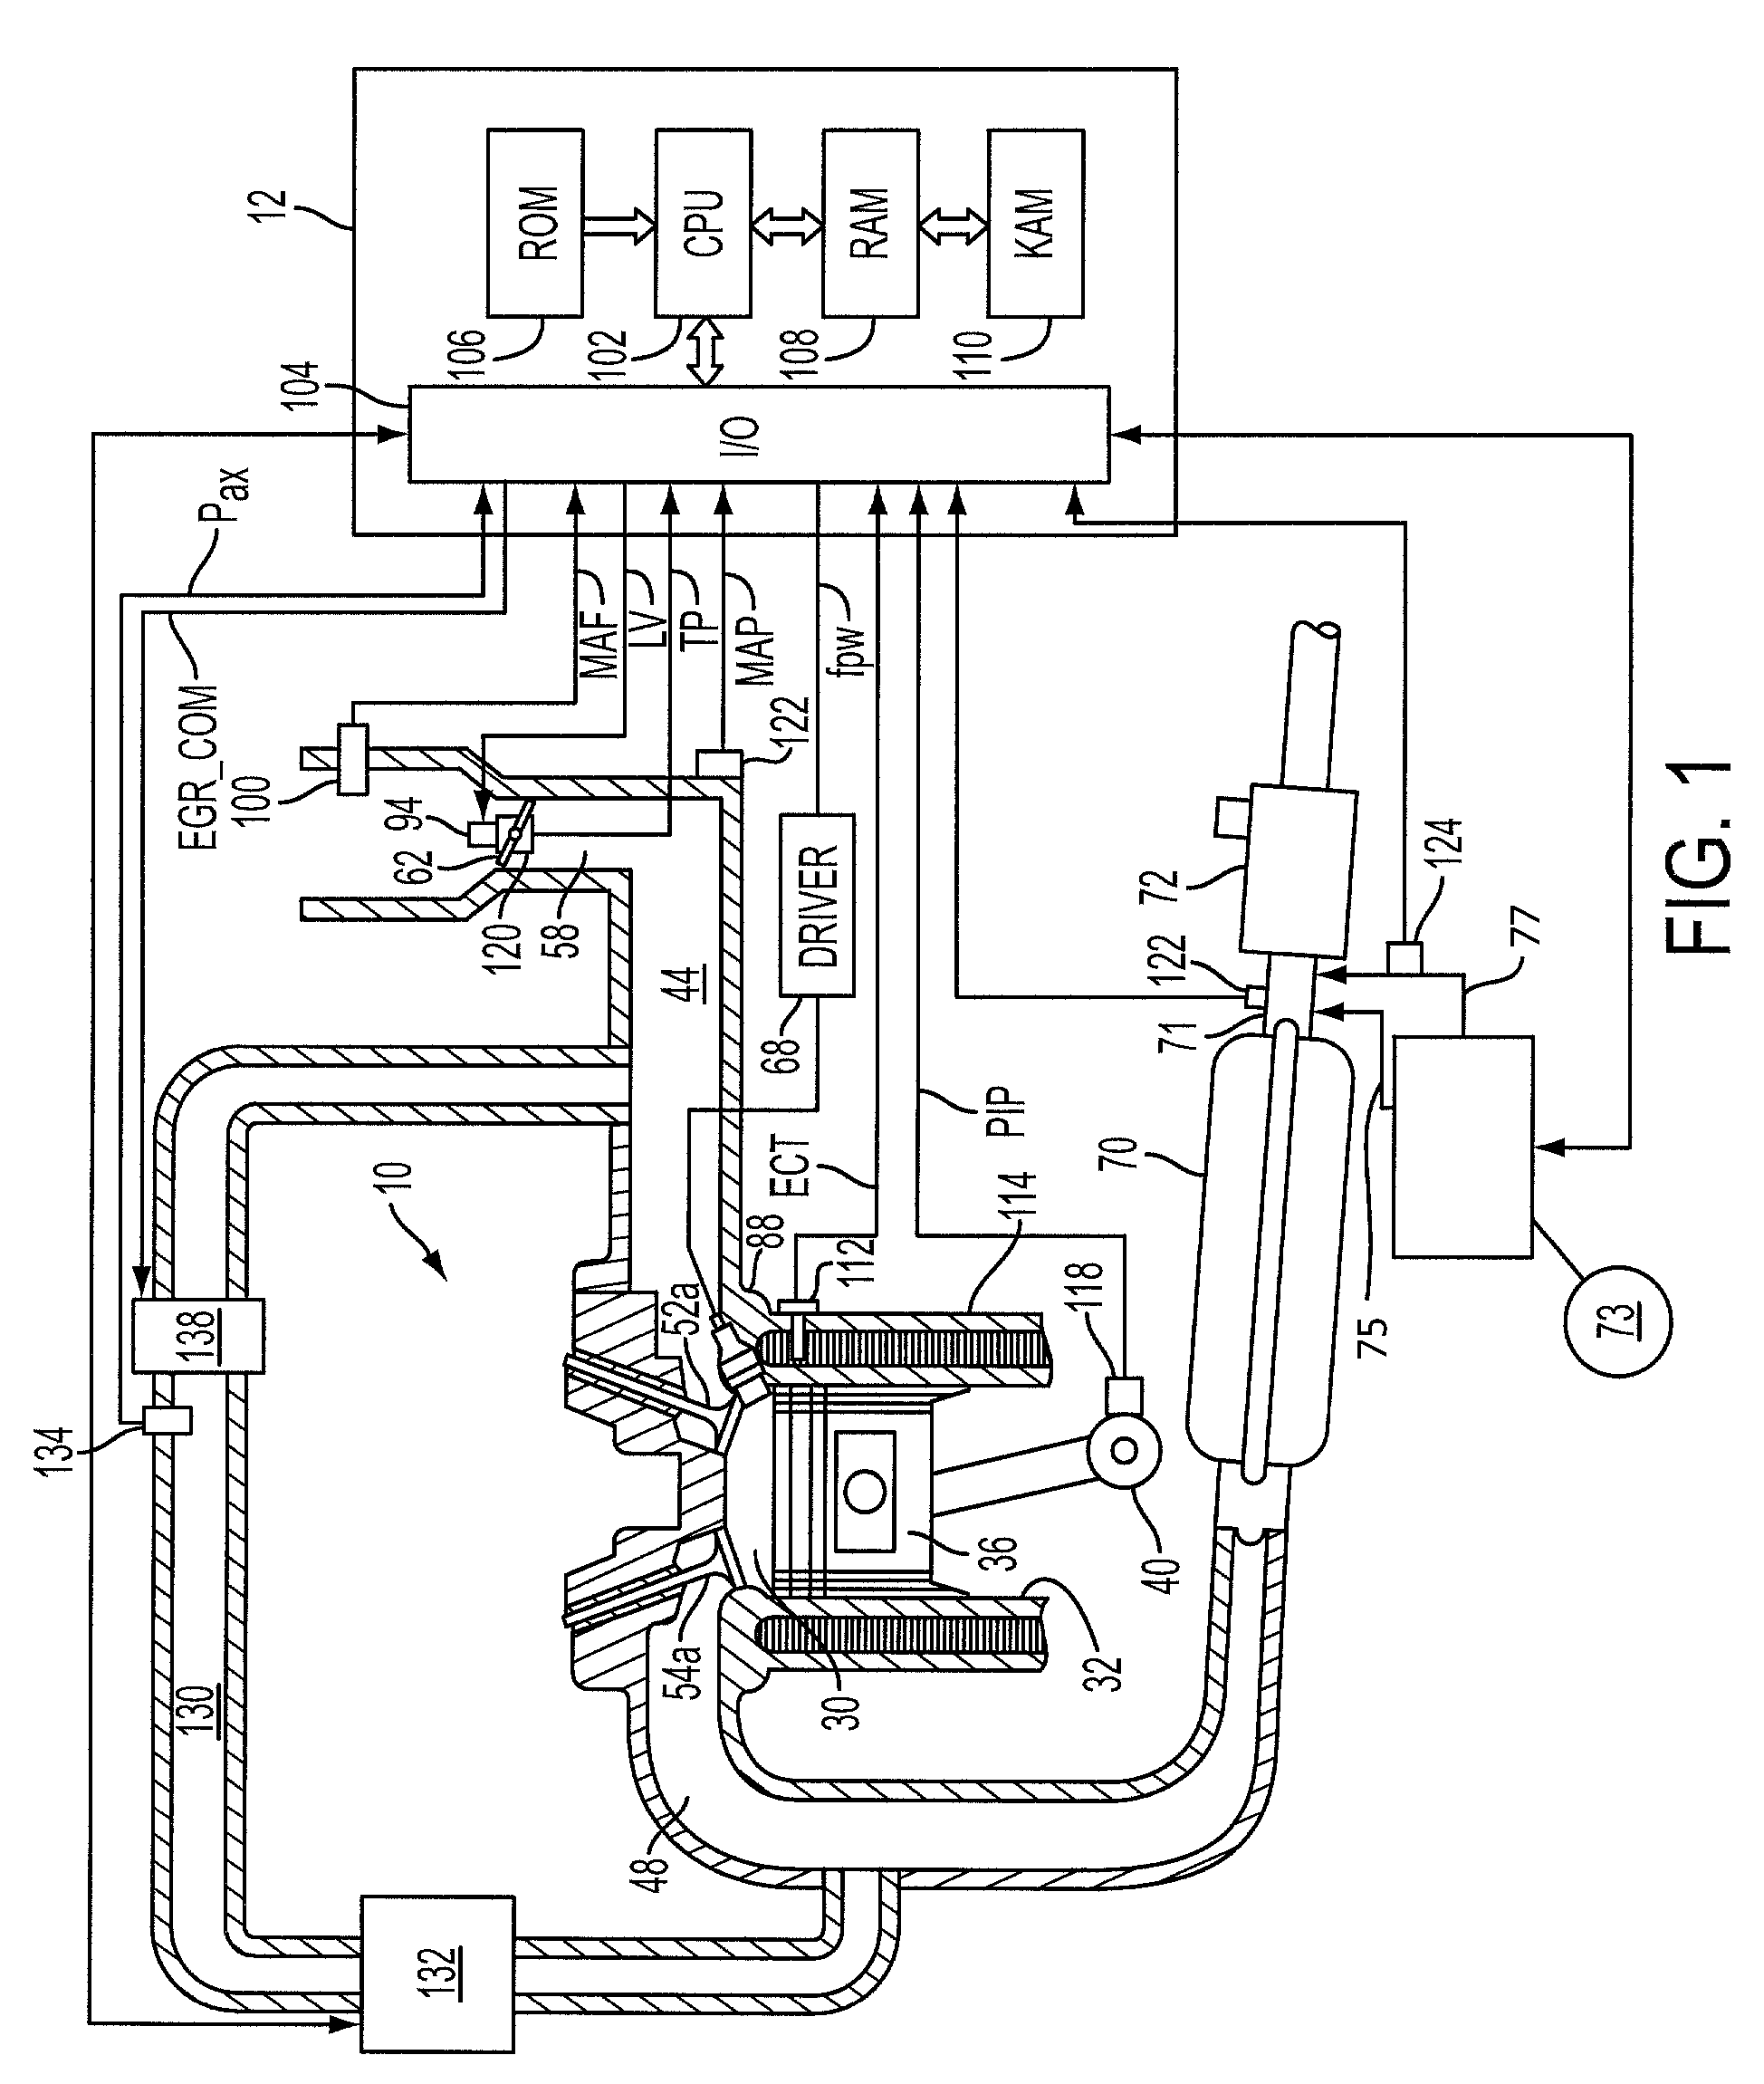 Management of a plurality of reductants for selective catalytic reduction